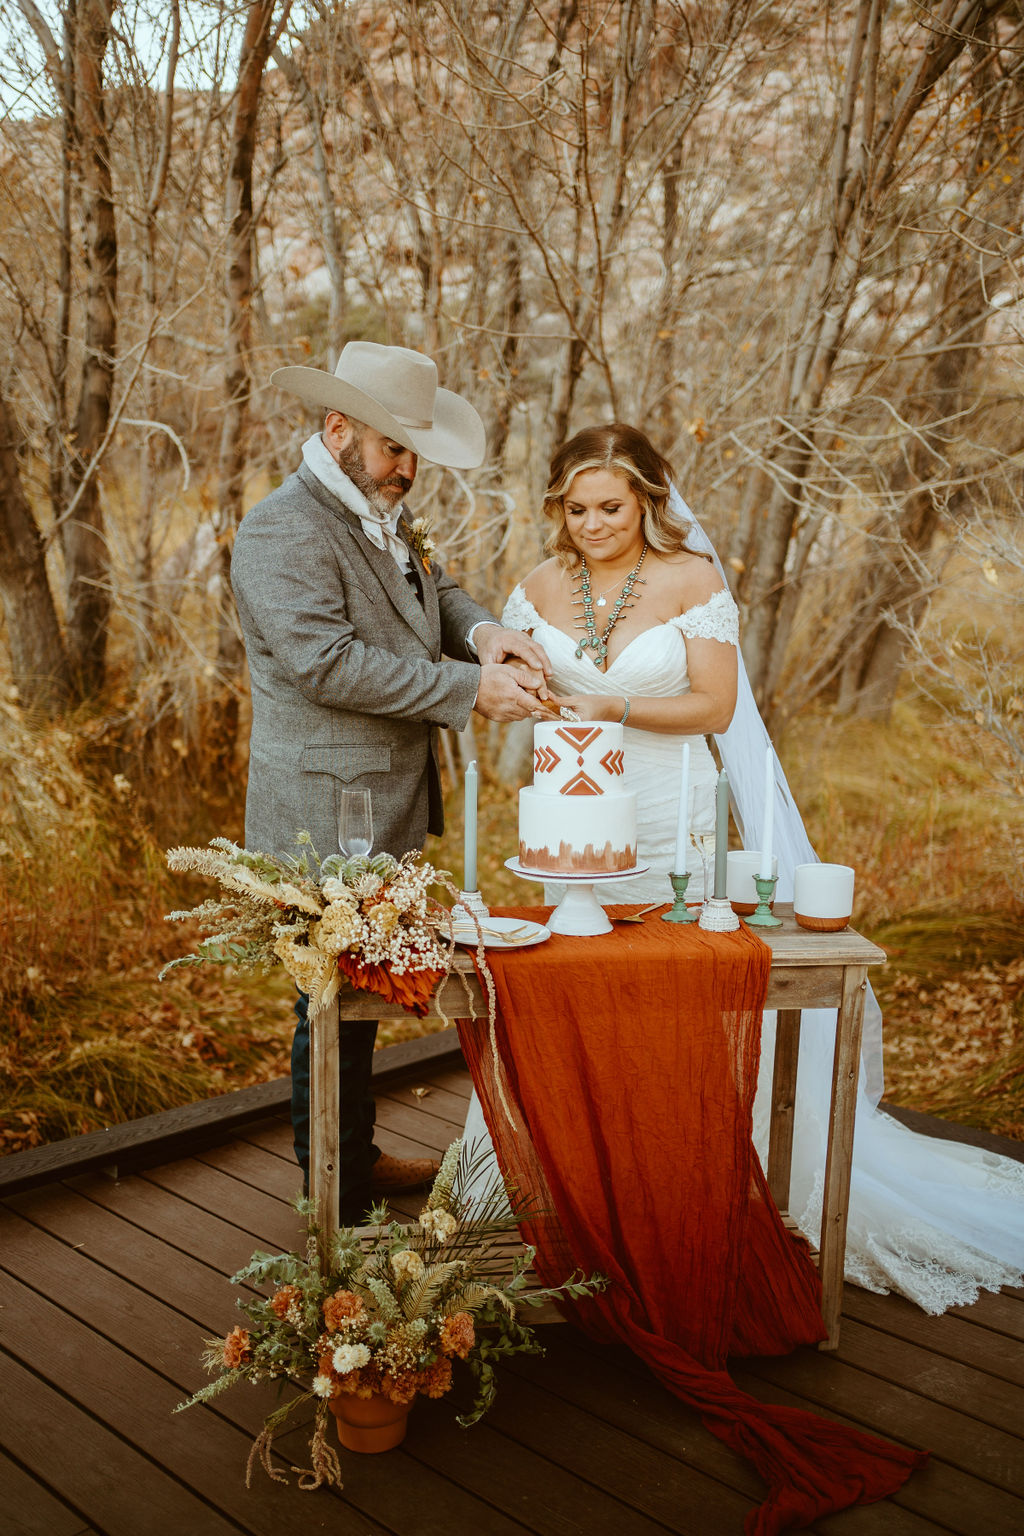 Newlyweds Cutting Cake during Western Inspired Turquoise Boho Elopement with Designed Cake Table and Dried Desert Florals 